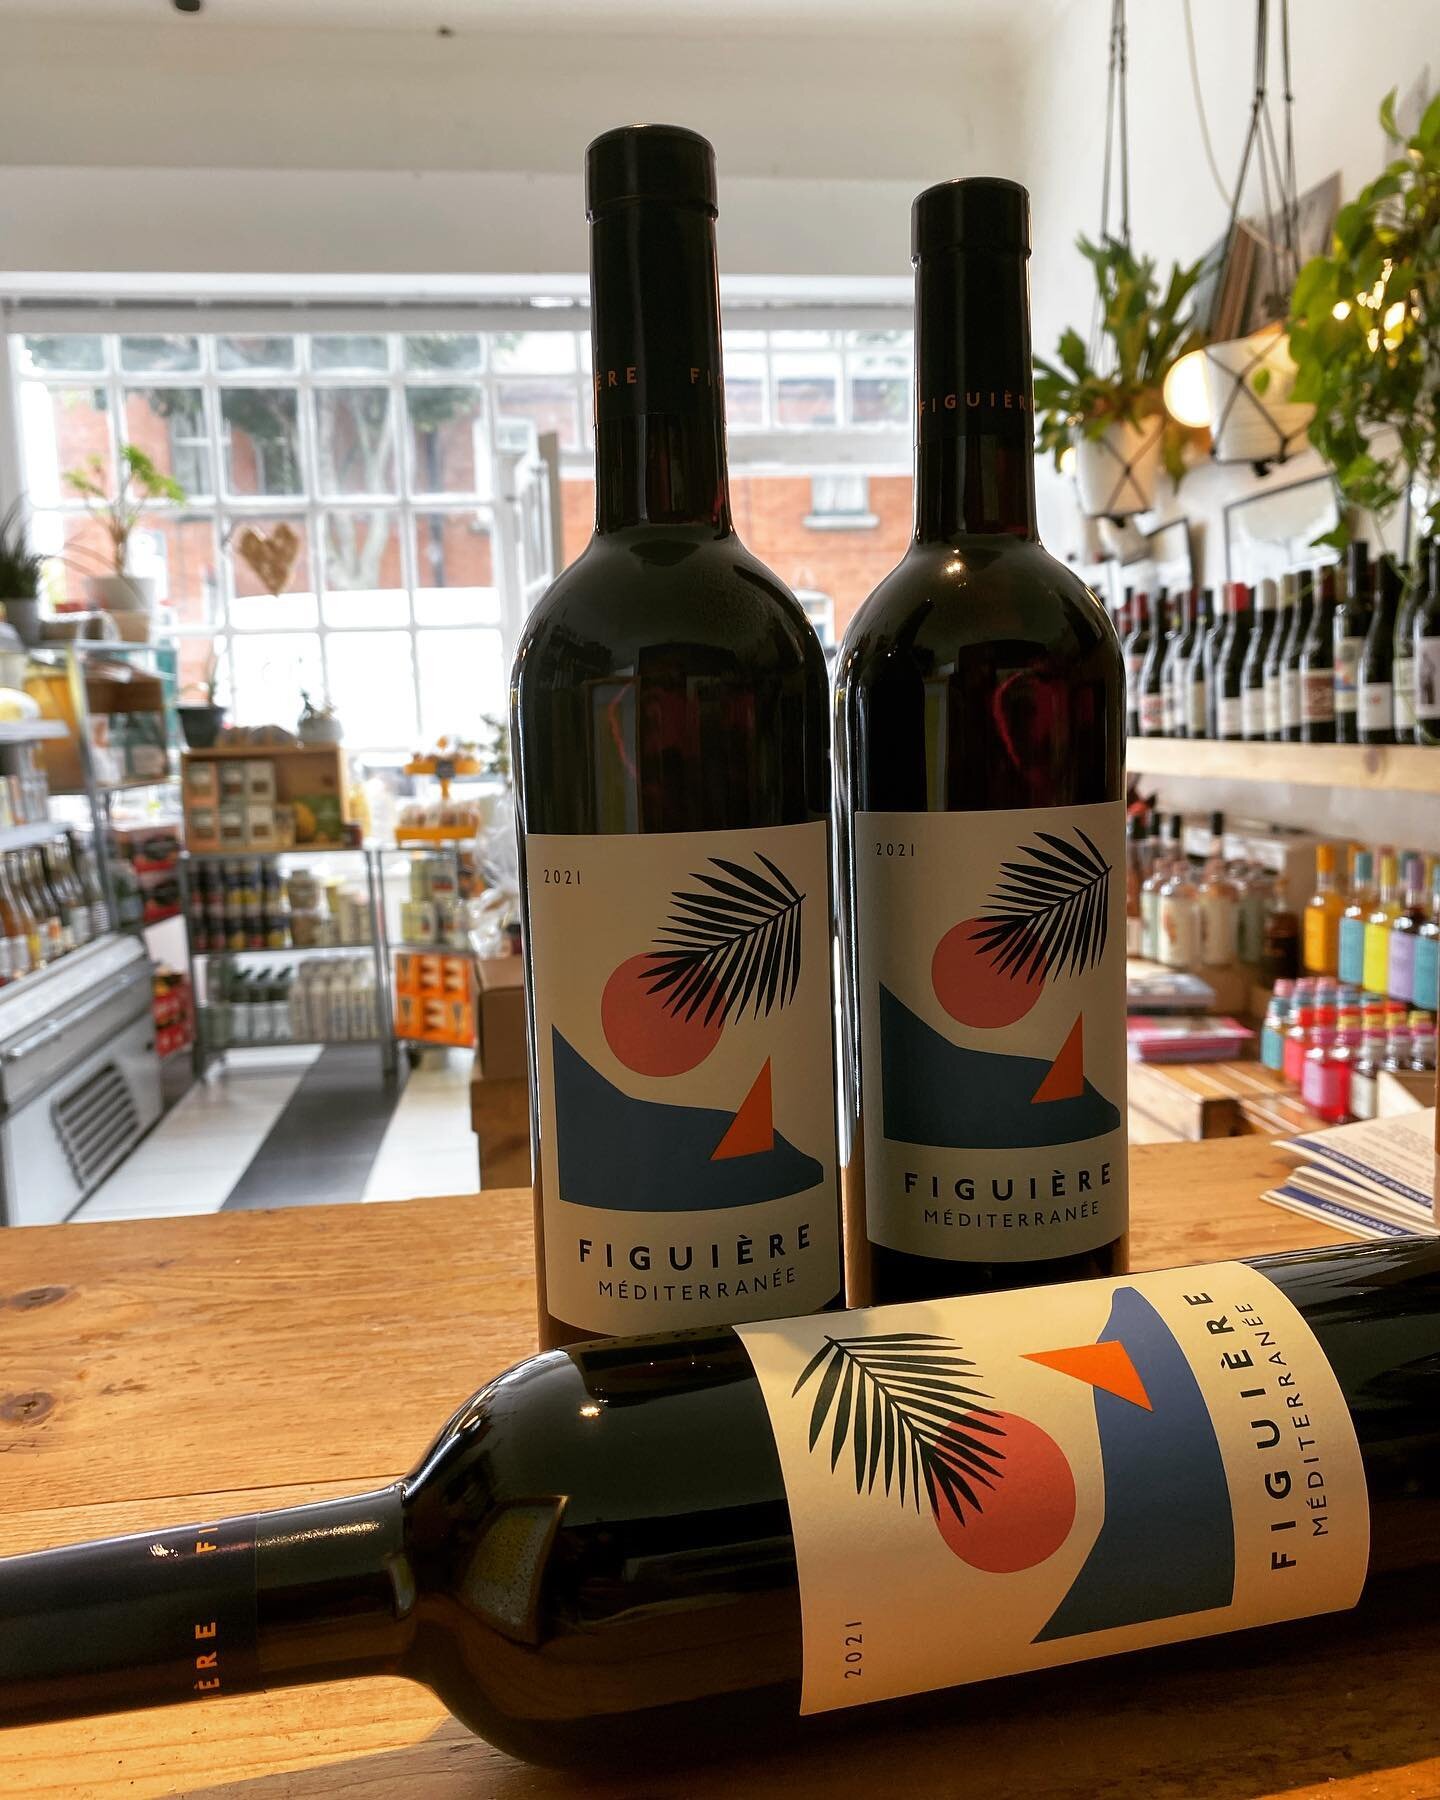 New arrival! A beautiful garnet color with purple highlights. A nose that opens with a touch of morello cherry and wild thyme spice. Fresh, flexible and fruity mouth.  Open 8-9pm.  #organicwine #redwine #stillsummer #fridayvibes #shoplocal #smallbusi